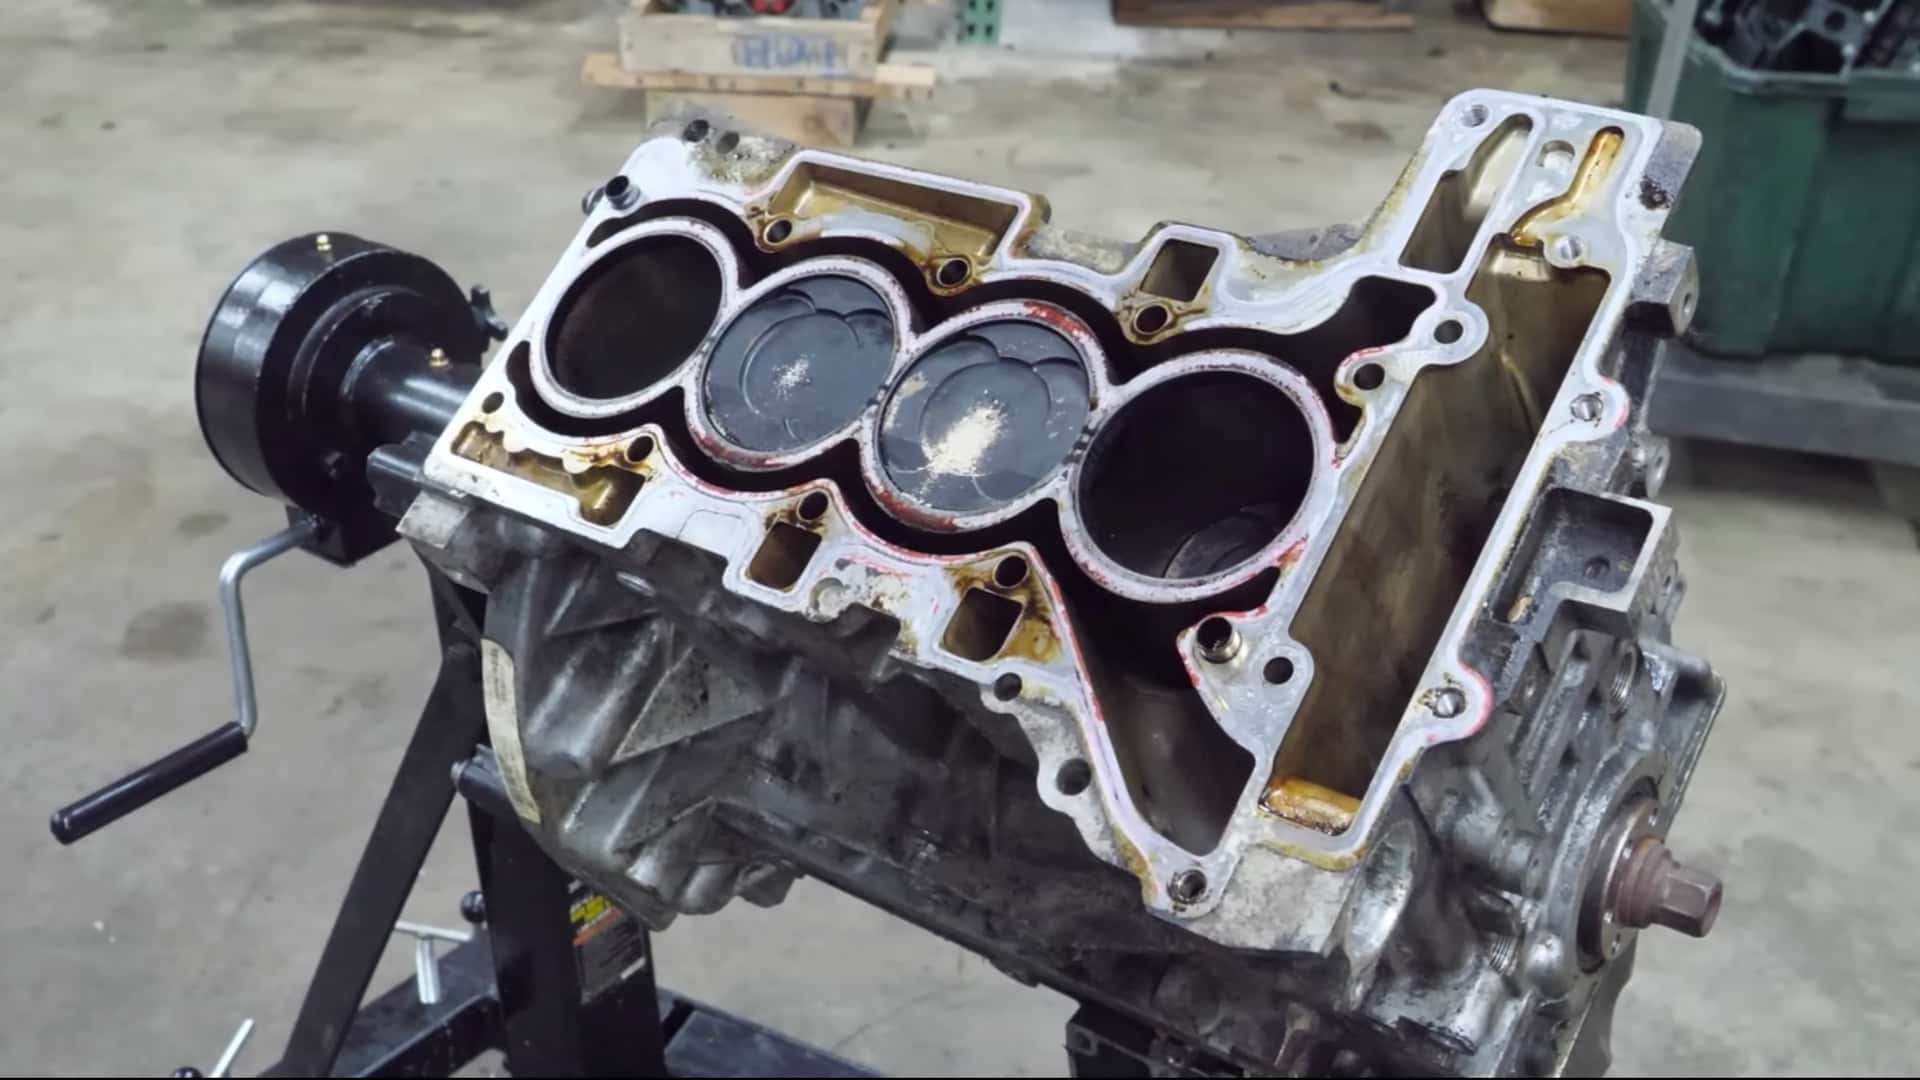 gnarly bmw engine teardown shows the dire consequences of overheating